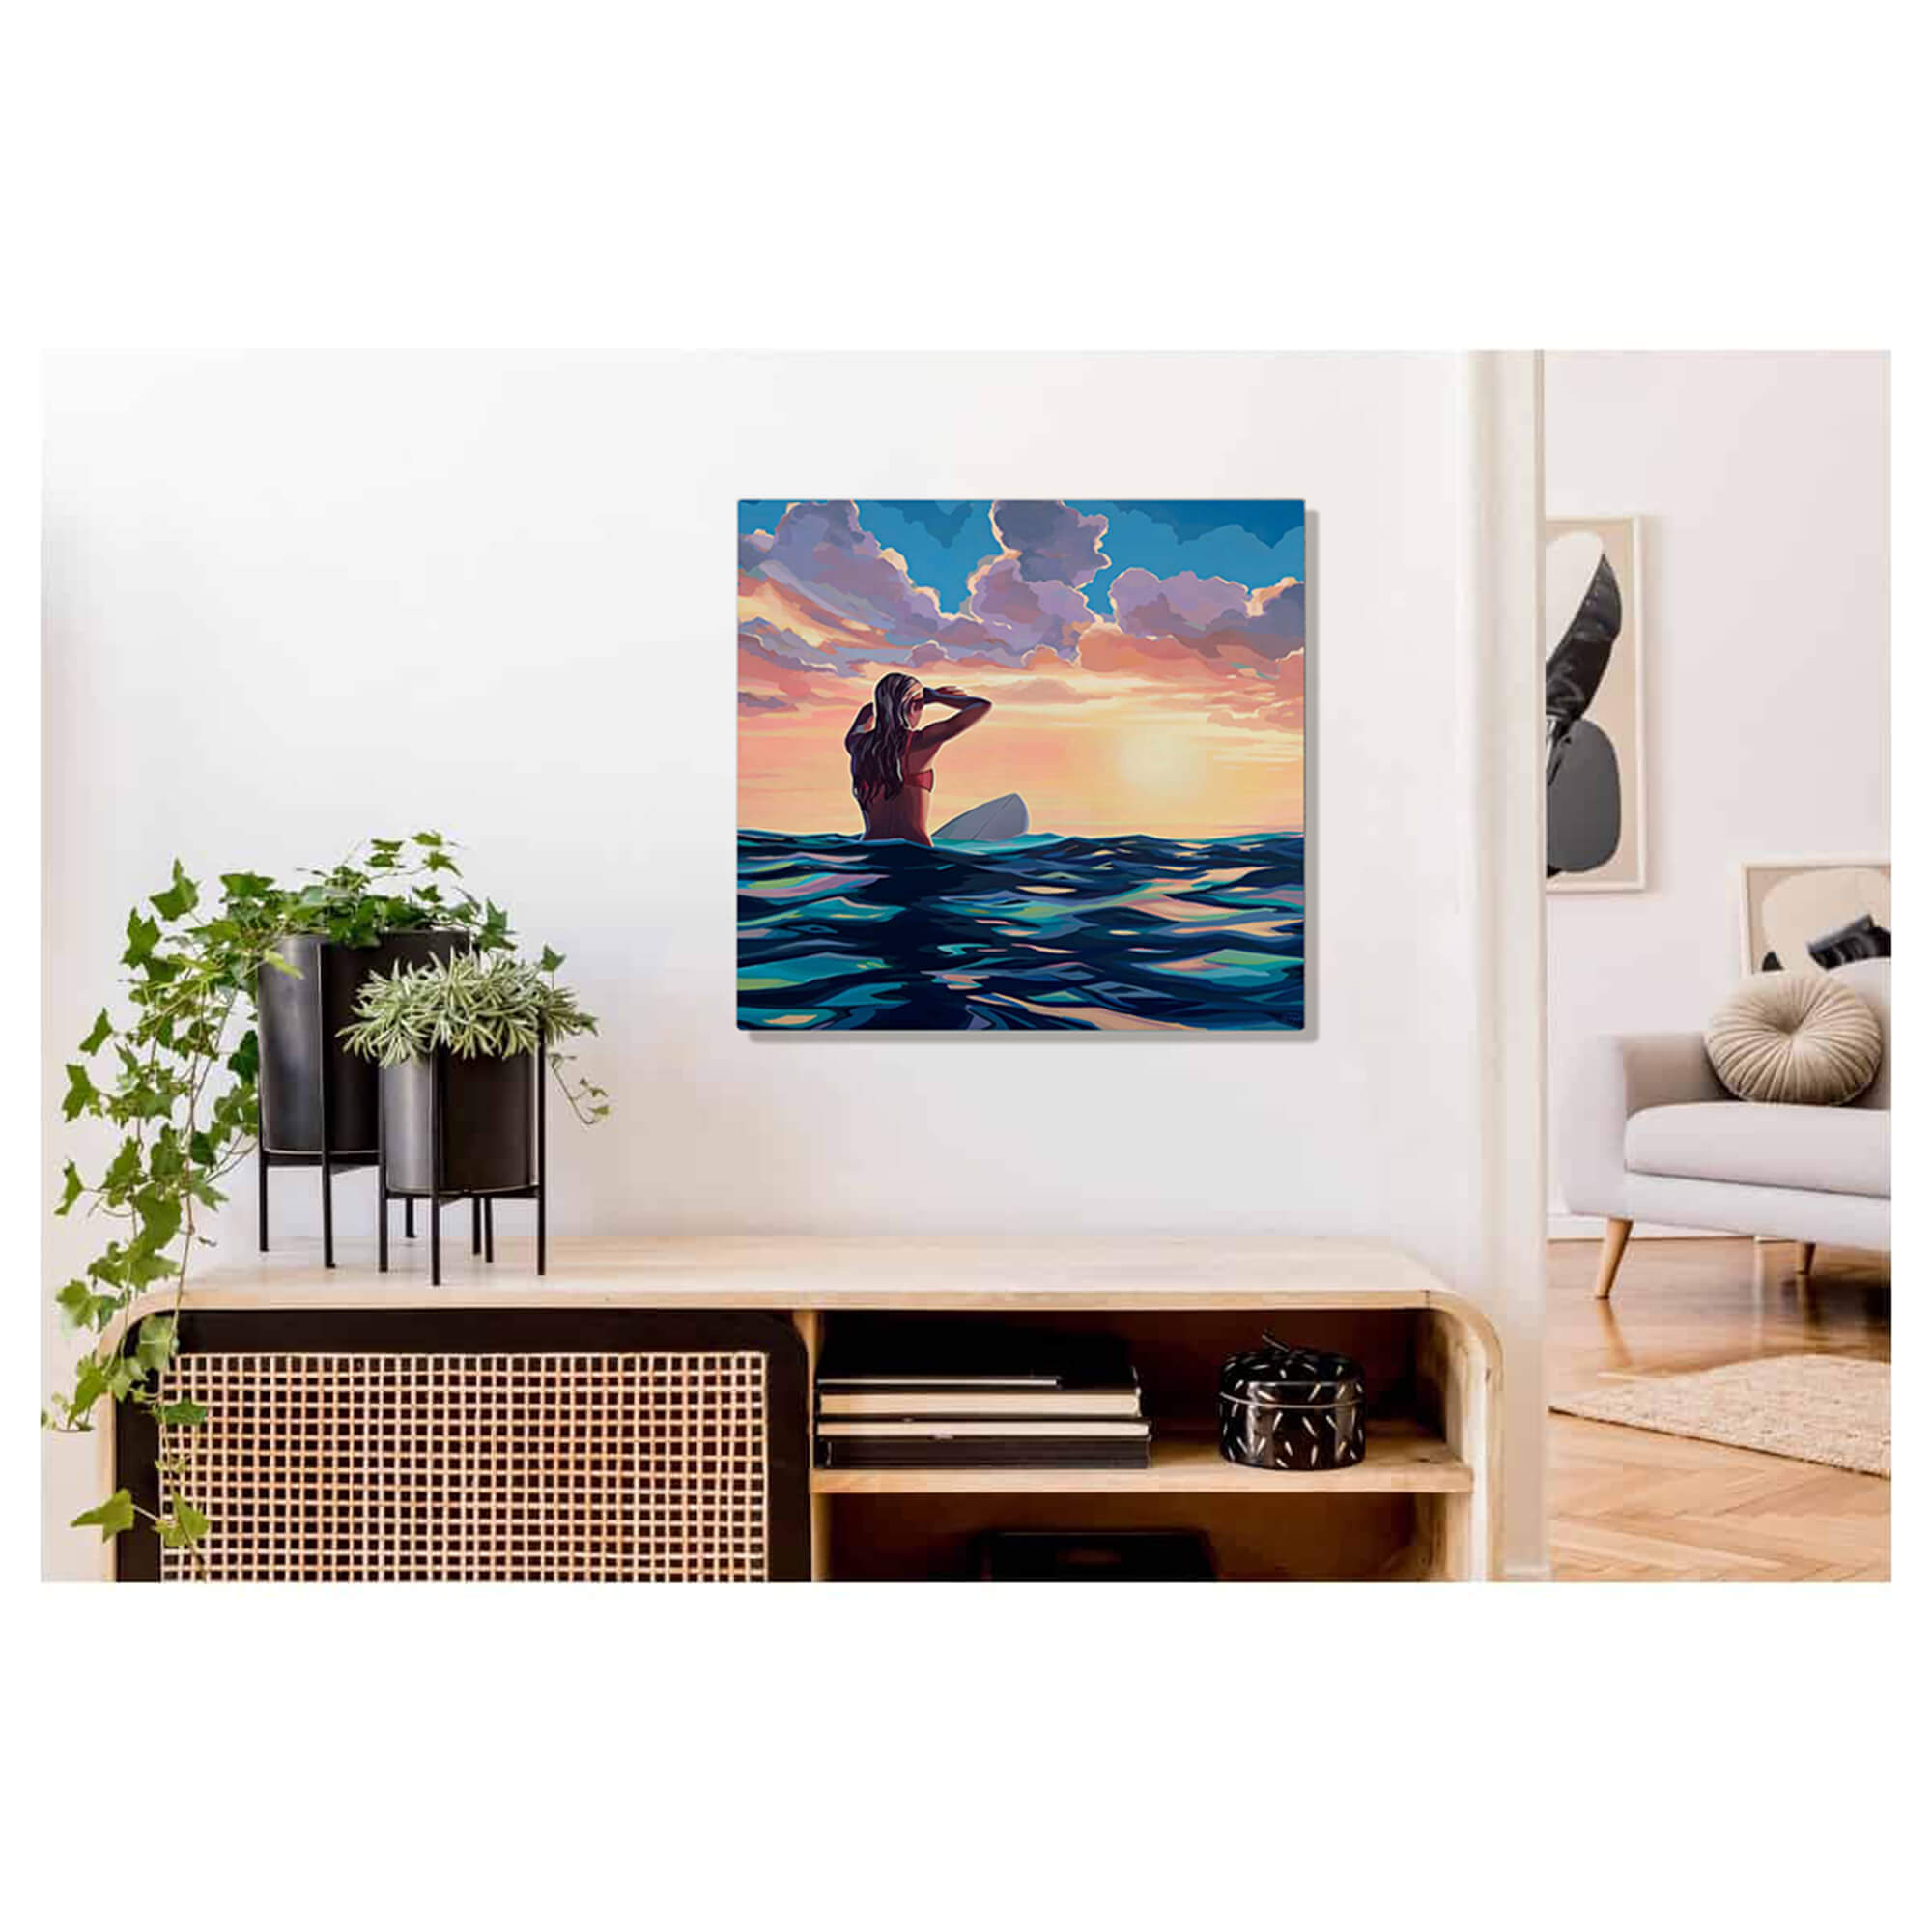 Metal art print of a woman sitting on her surfboard surrounded by the blues of the ocean looking out onto the sunset by Hawaii artist Christie Shinn